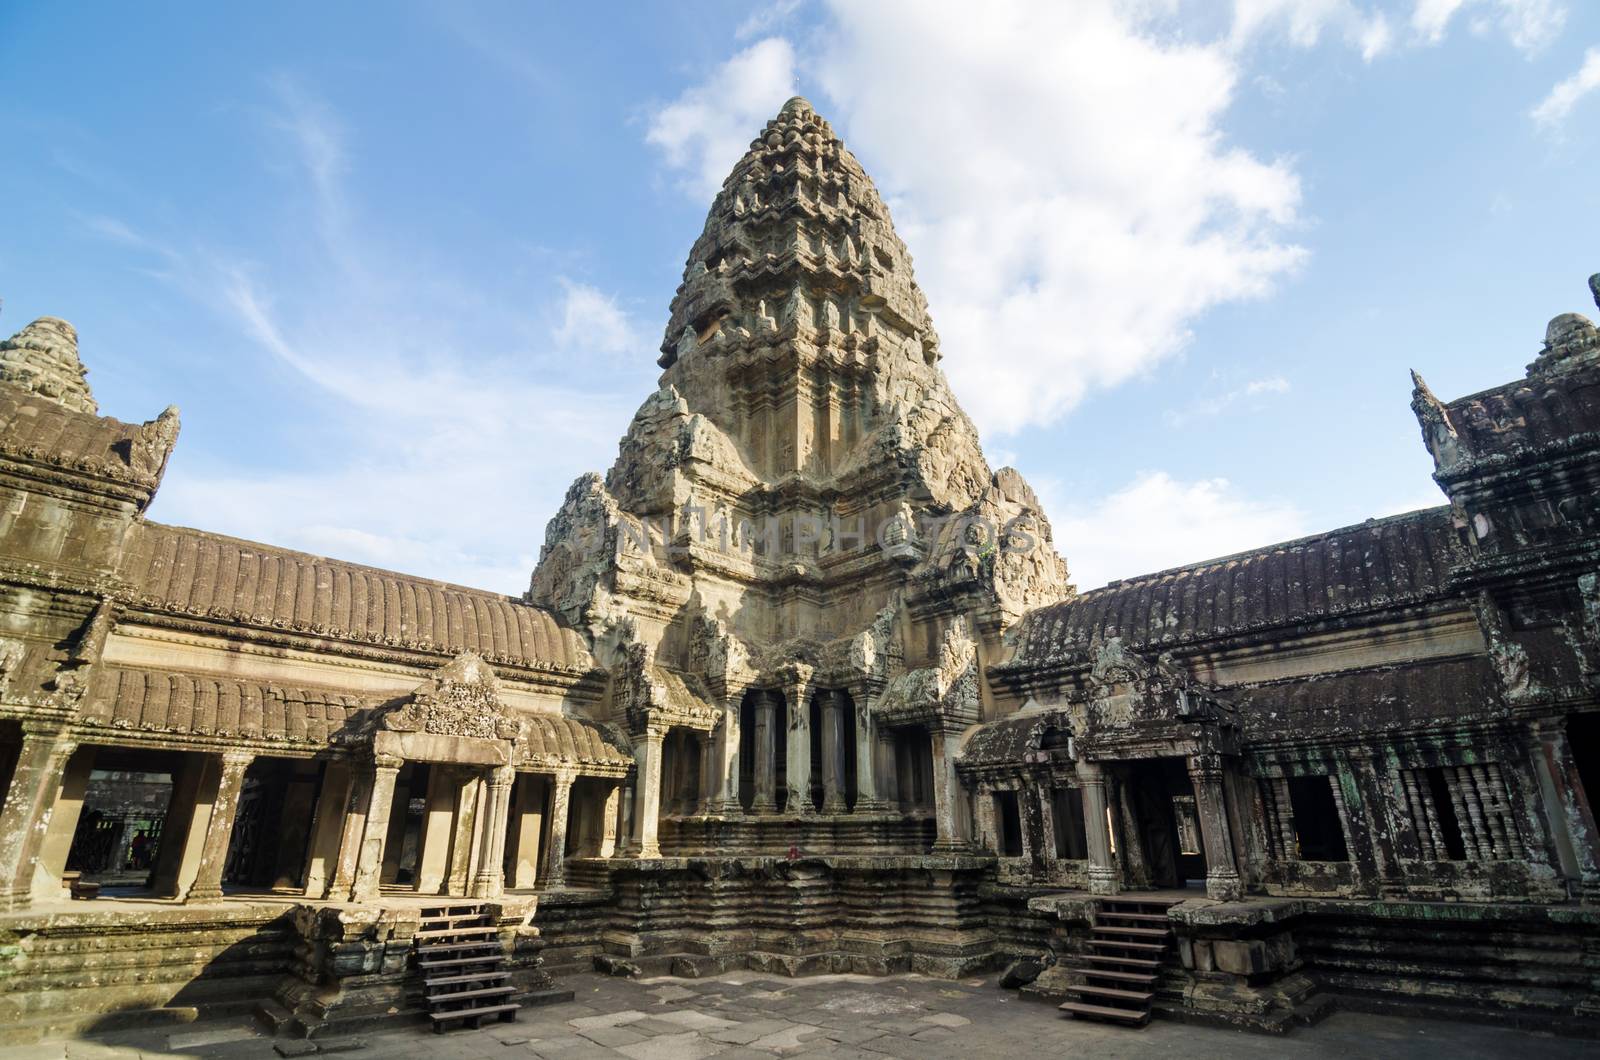 Central Tower of Angkor Wat in Siem Reap, Cambodia